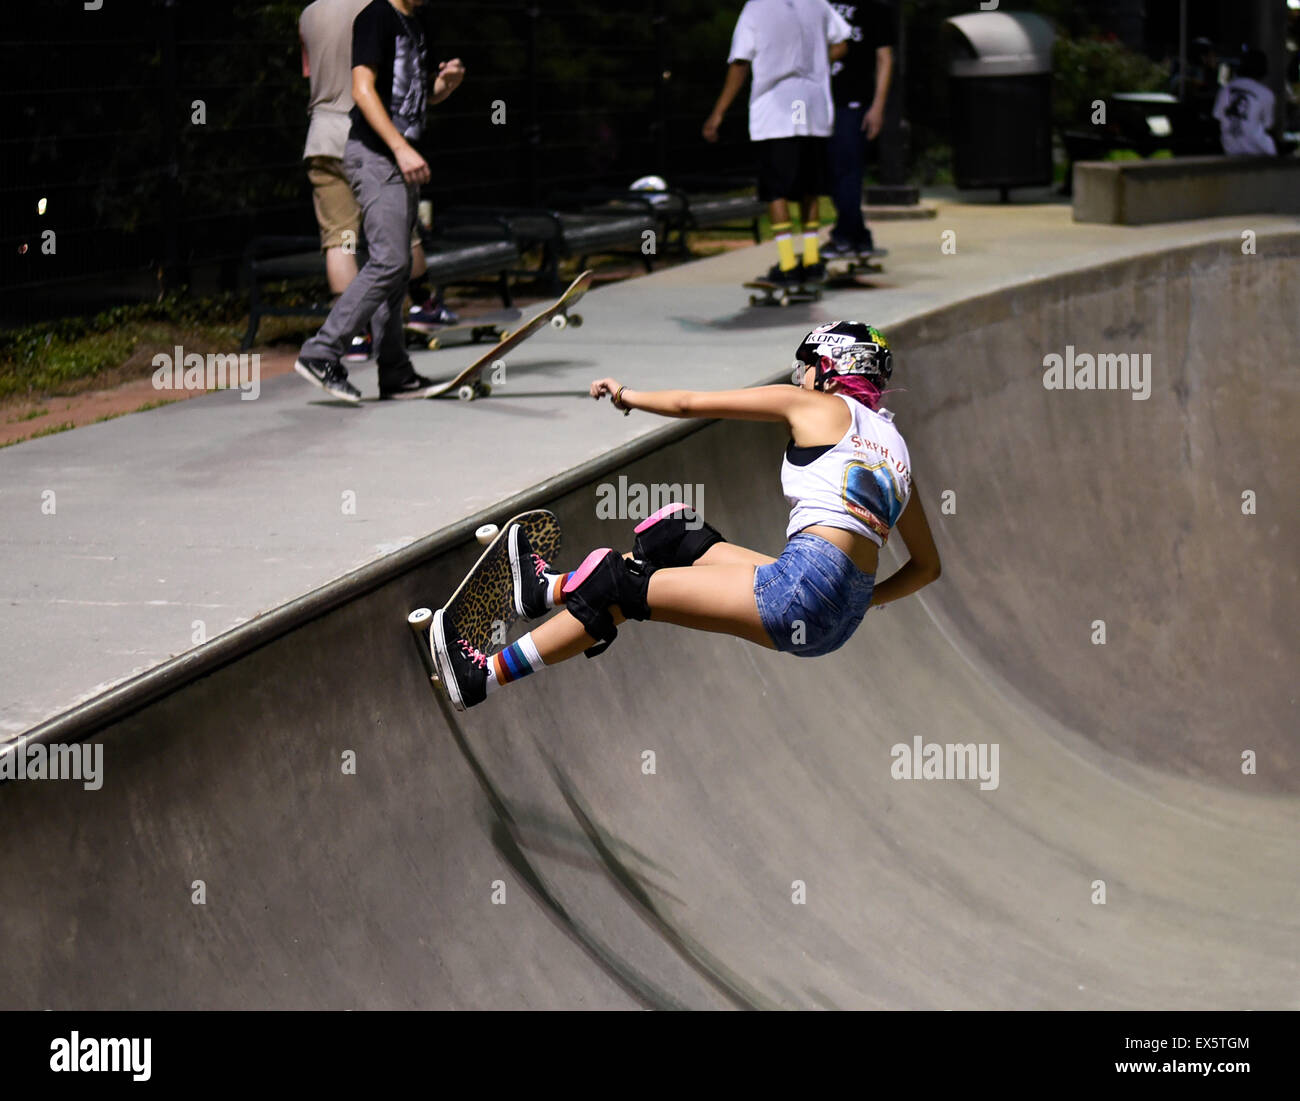 Skaterboarder with pink hair at skate park in Houston Stock Photo